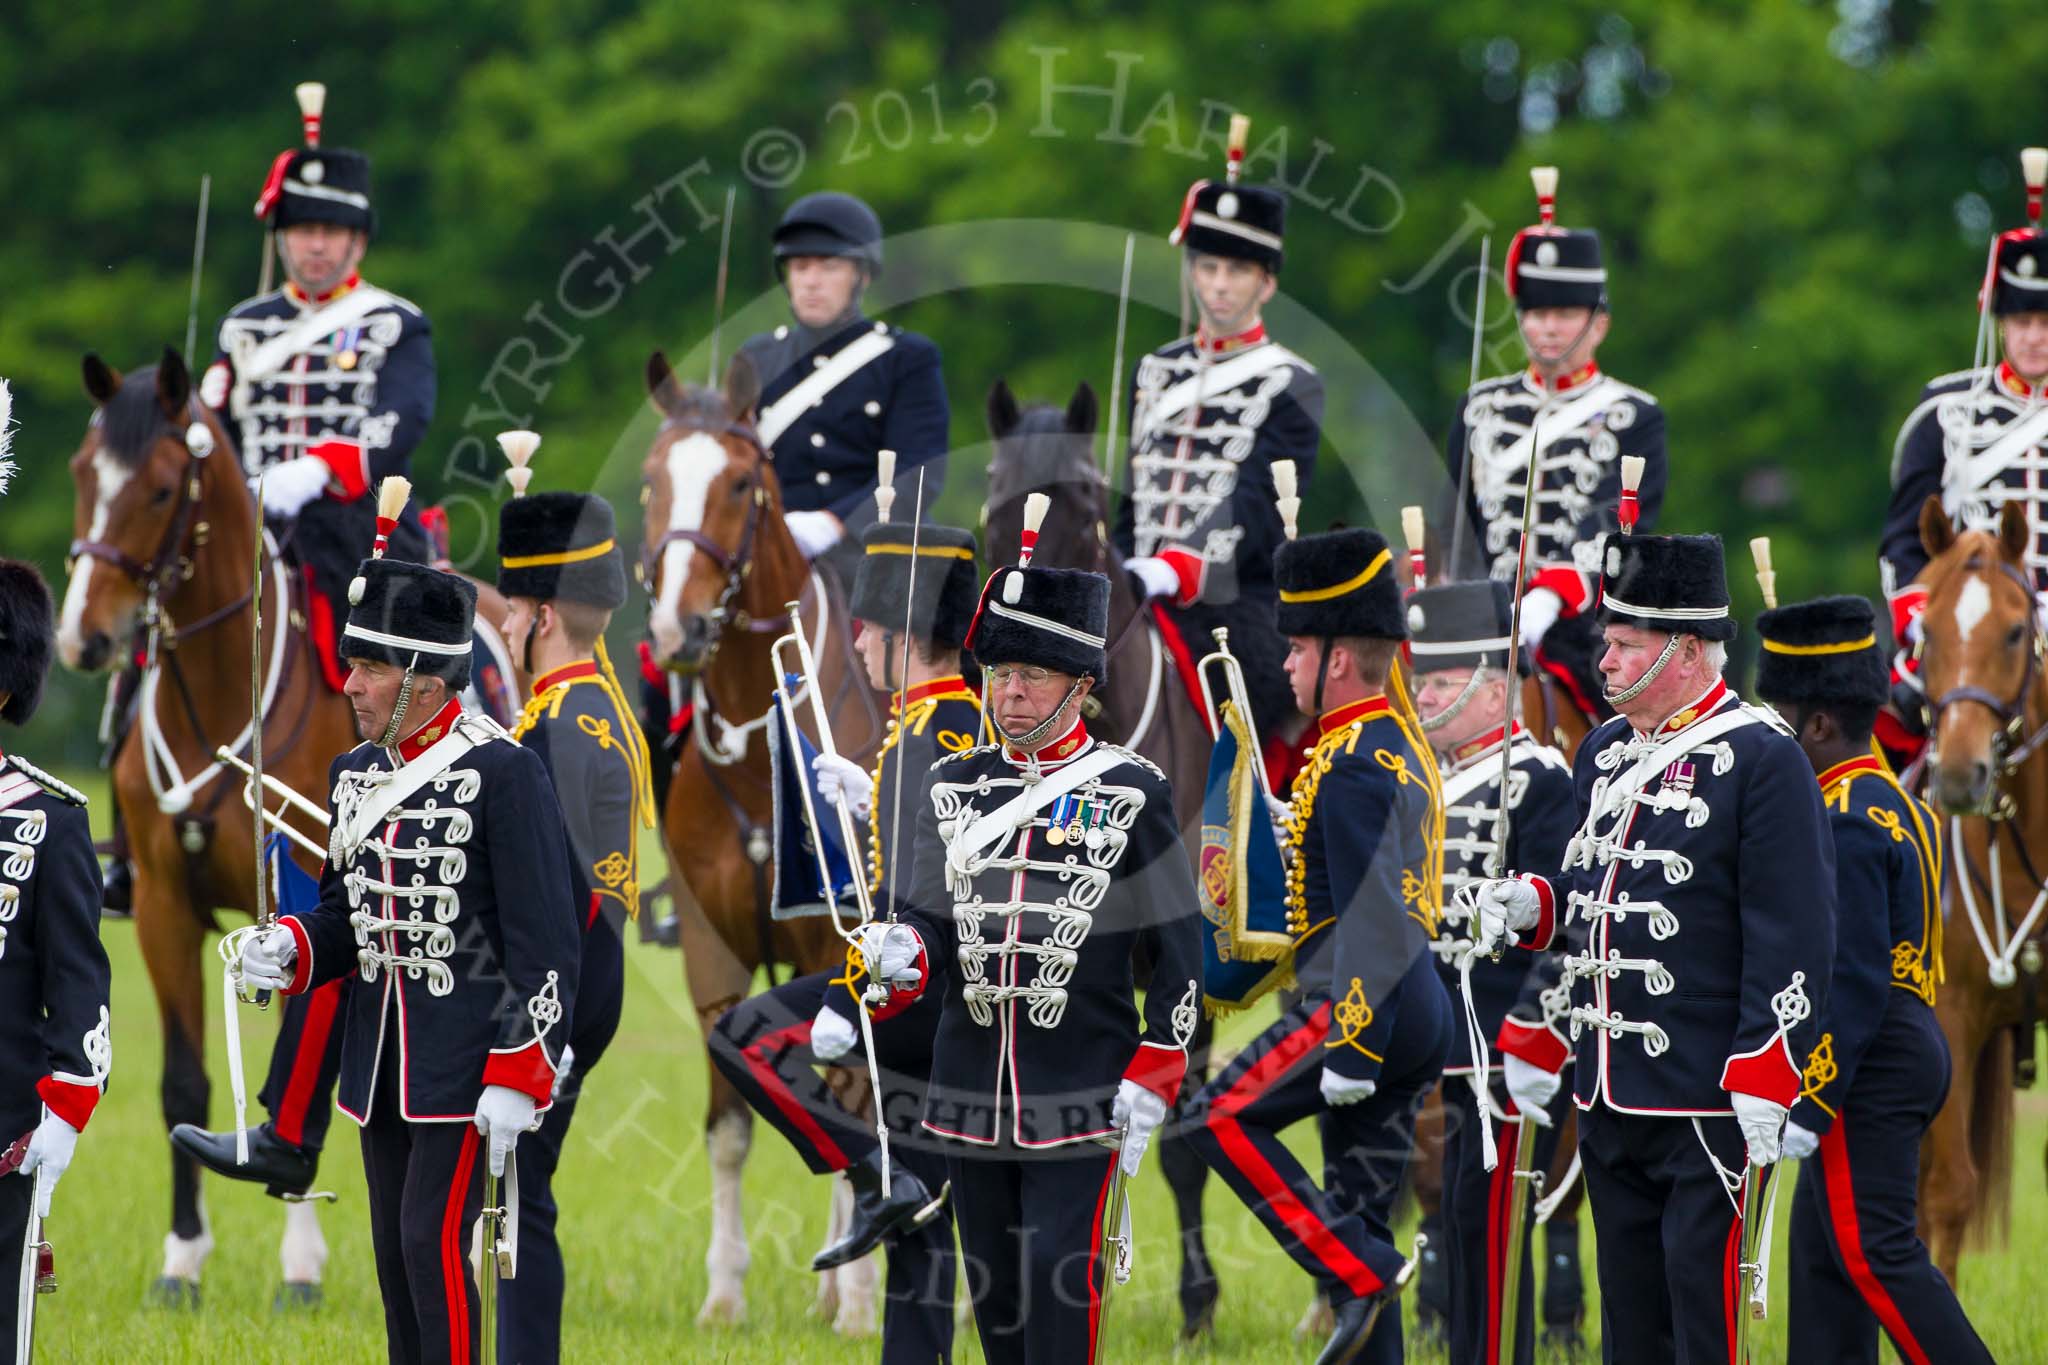 The Light Cavalry HAC Annual Review and Inspection 2013.
Windsor Great Park Review Ground,
Windsor,
Berkshire,
United Kingdom,
on 09 June 2013 at 13:29, image #381